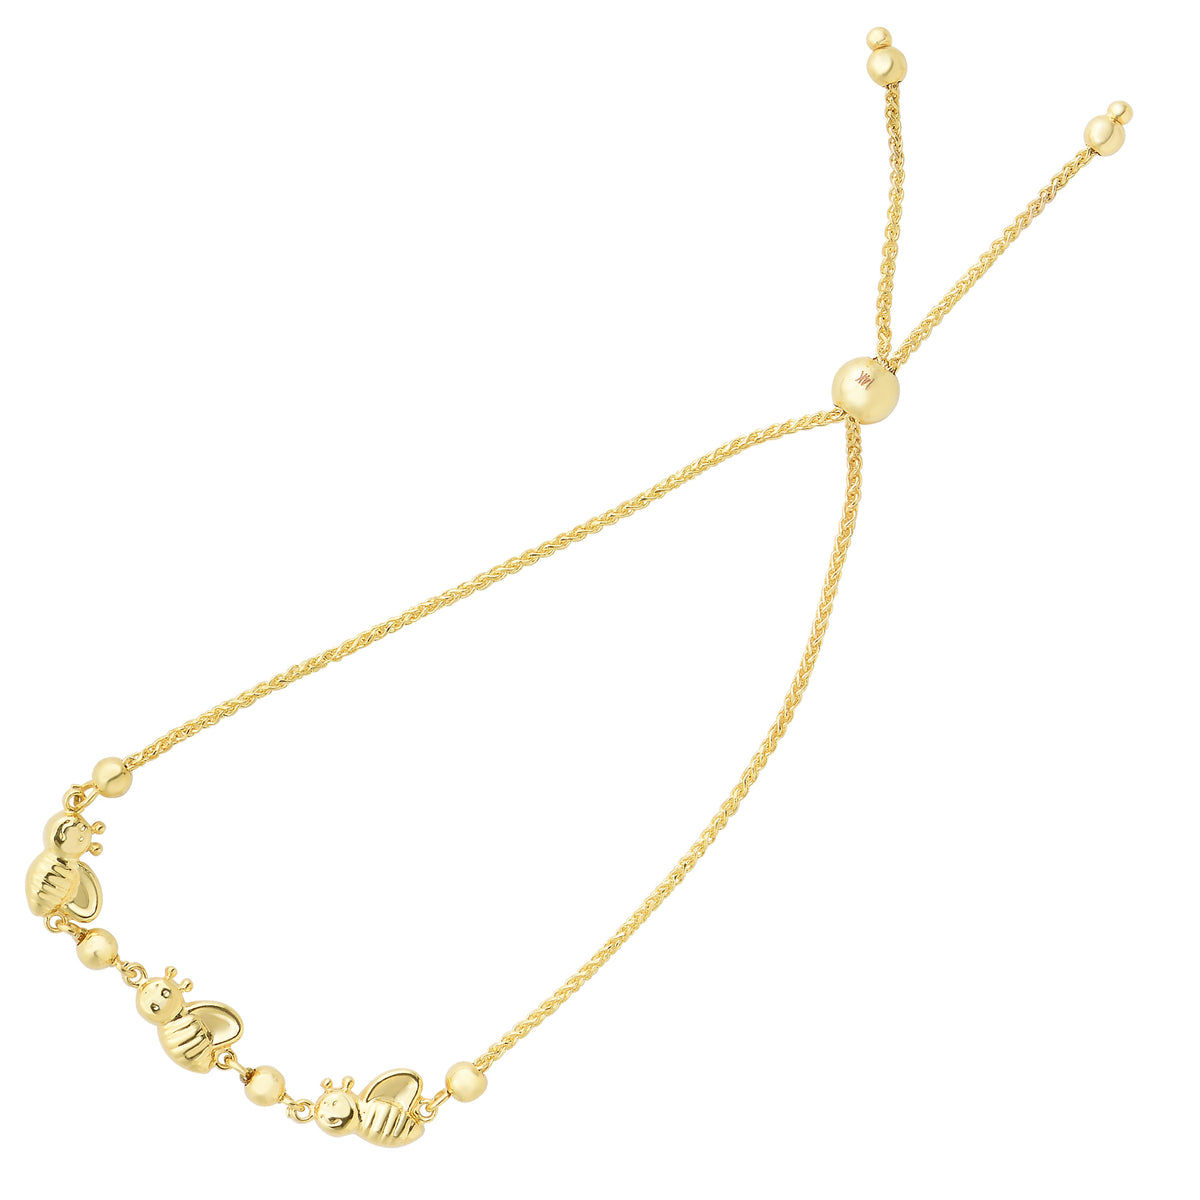 Bumble Bee Charms Theme Bolo Friendship Adjustable Bracelet In 14K Yellow Gold, 9.25"